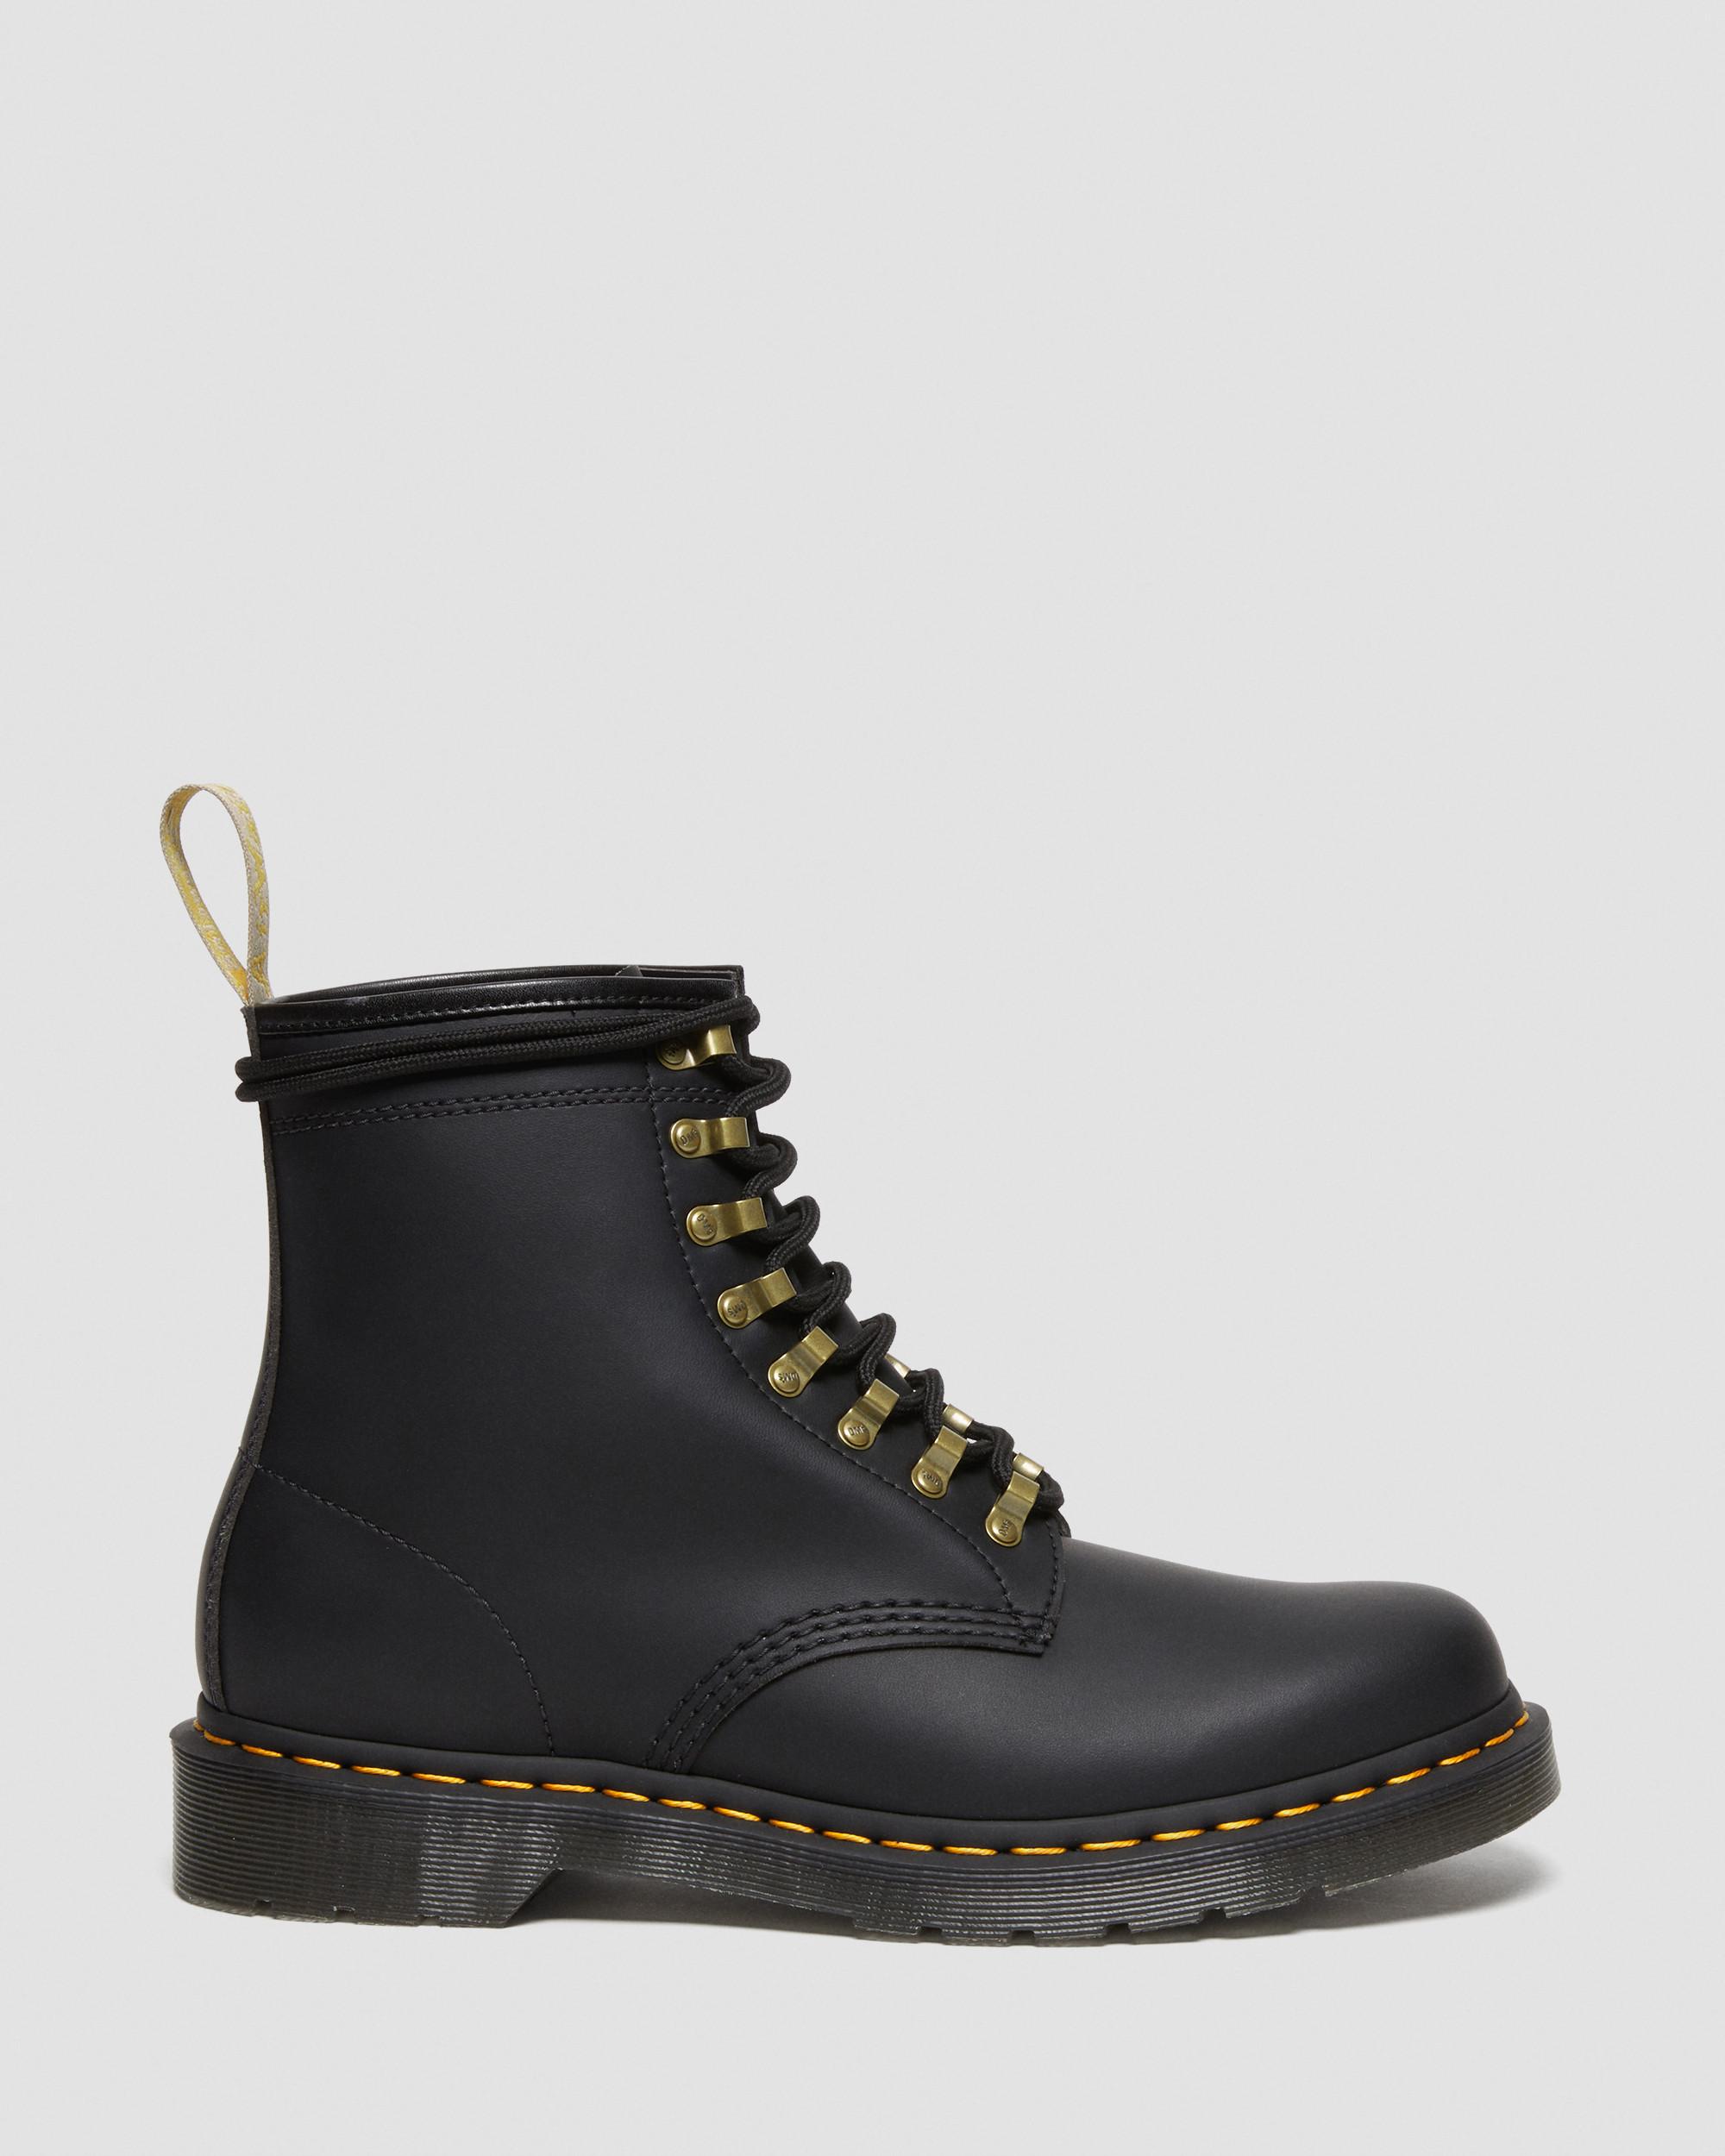 1460 Vegan Lace Up Boots in Black | Dr. Martens